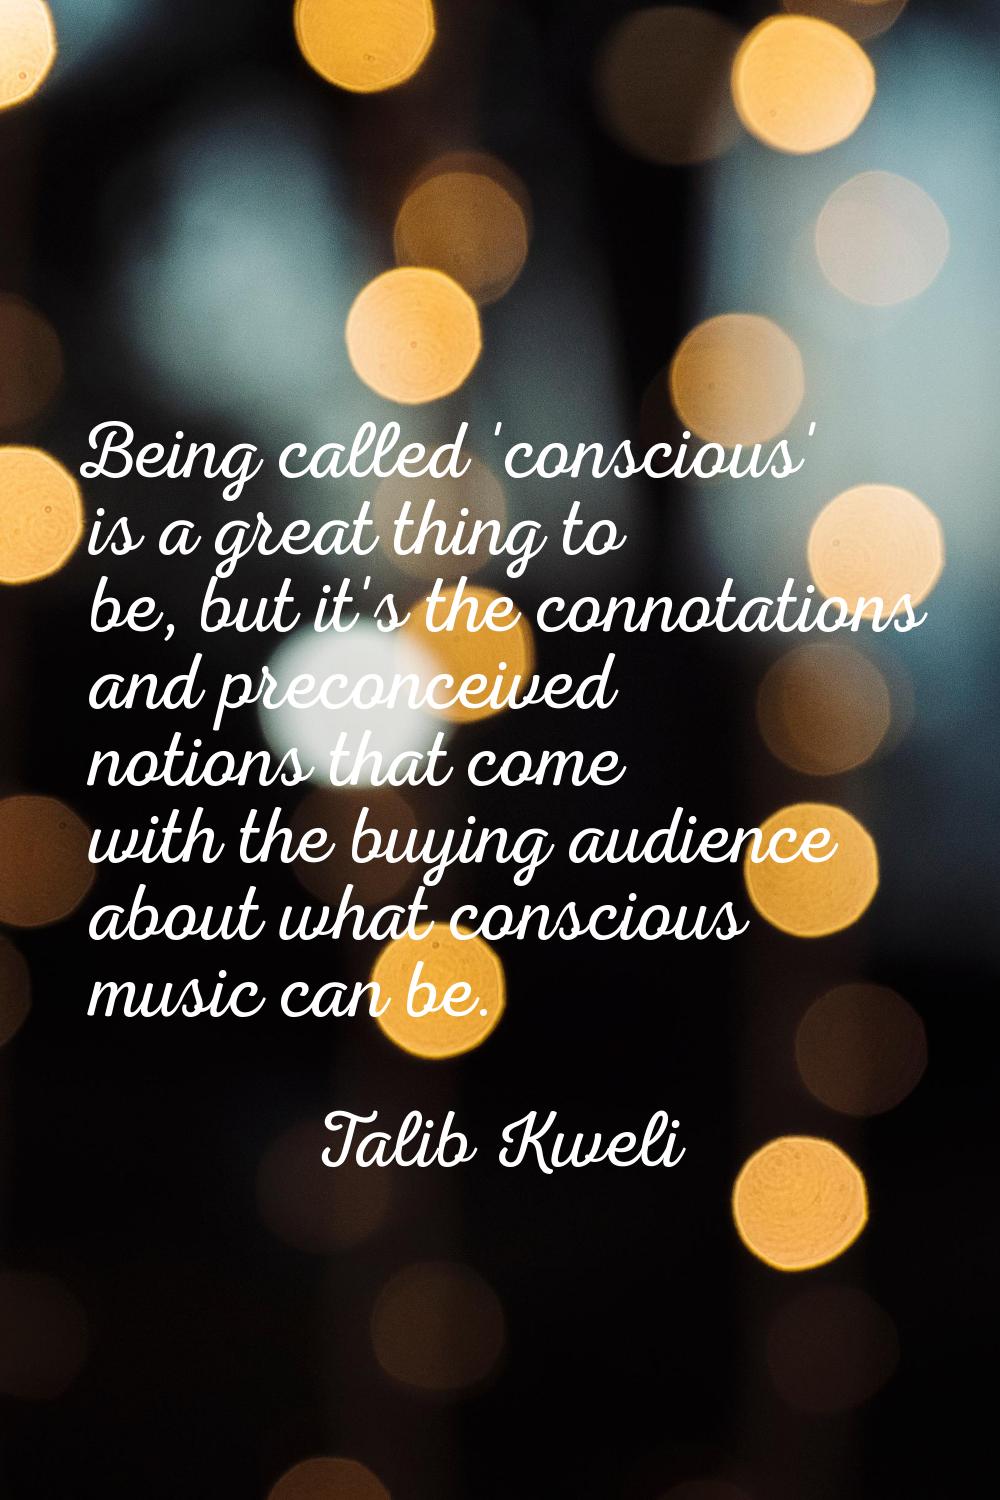 Being called 'conscious' is a great thing to be, but it's the connotations and preconceived notions